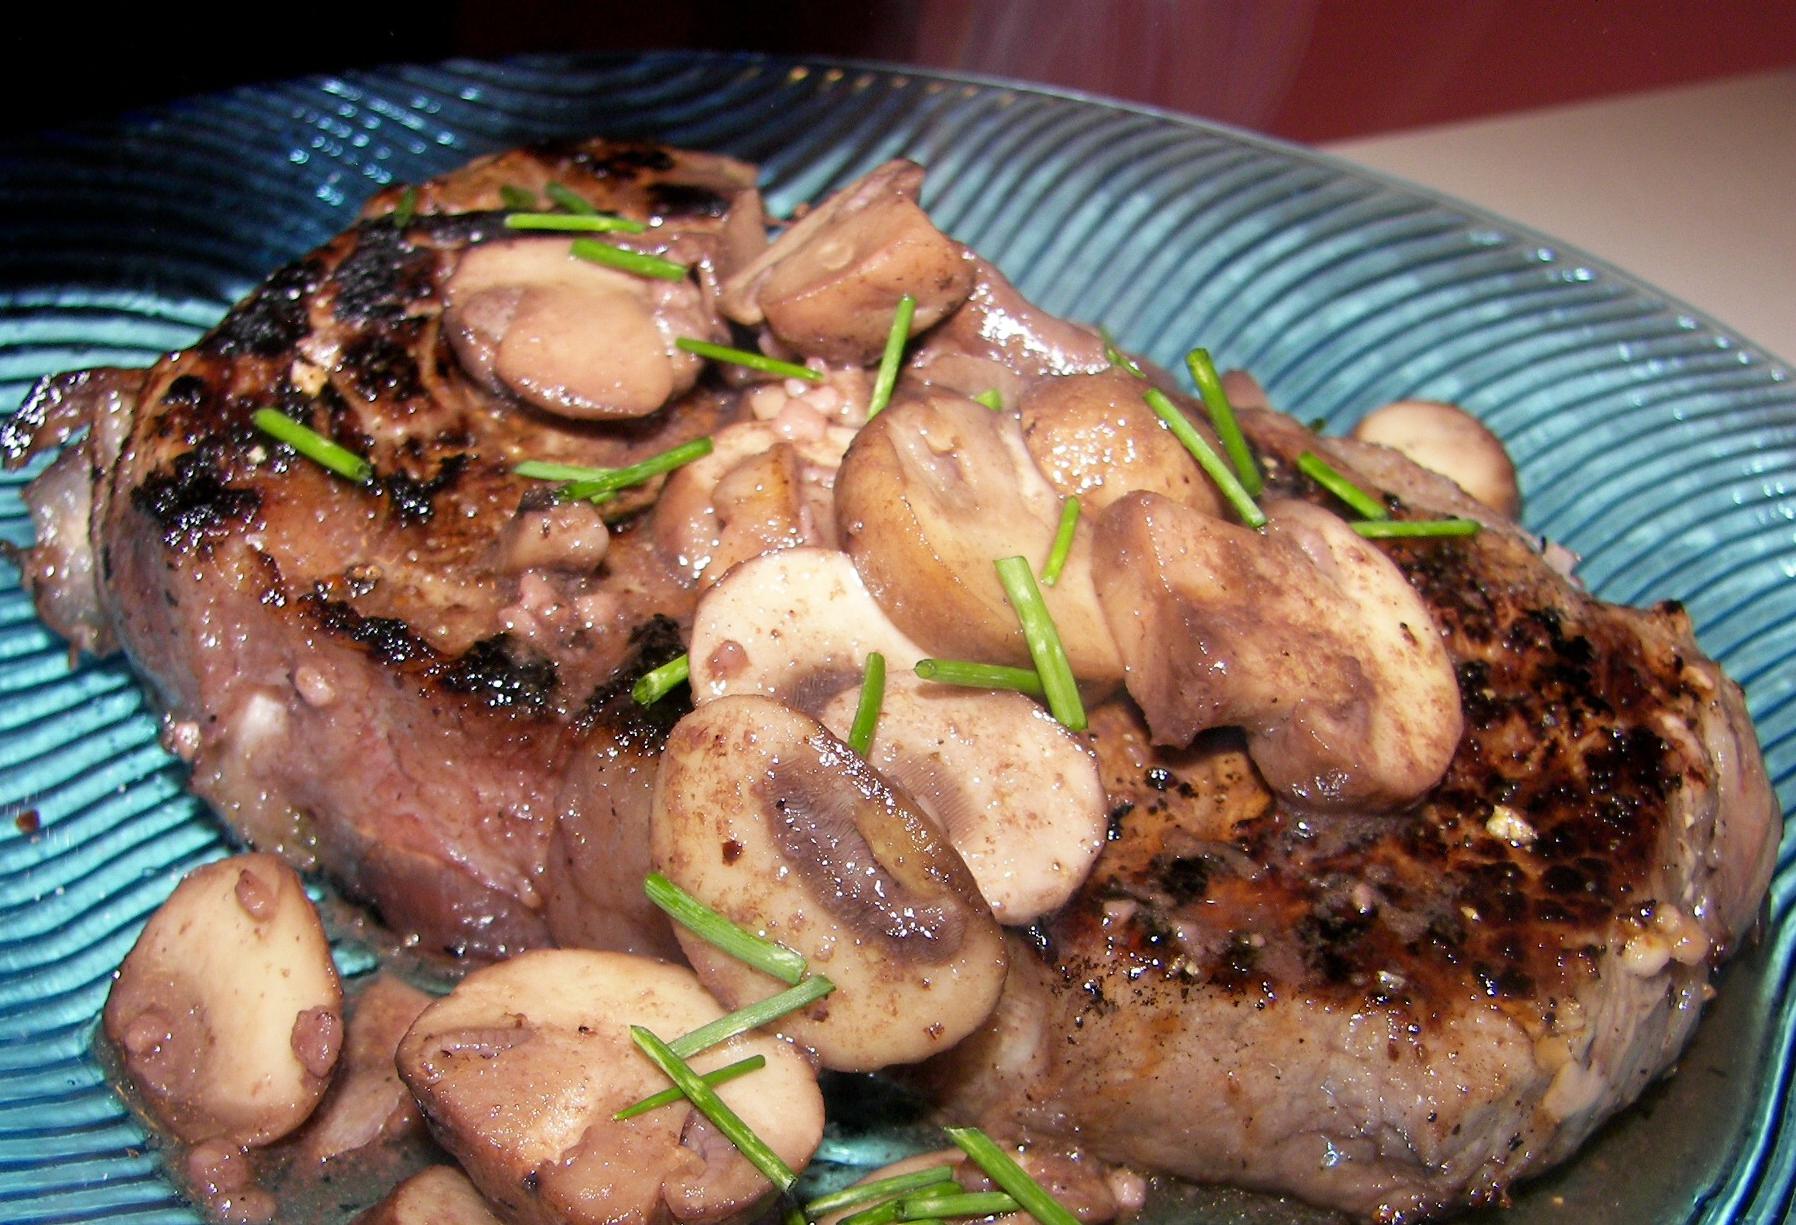  Pair this red wine steak with a glass of your favorite Cabernet Sauvignon.